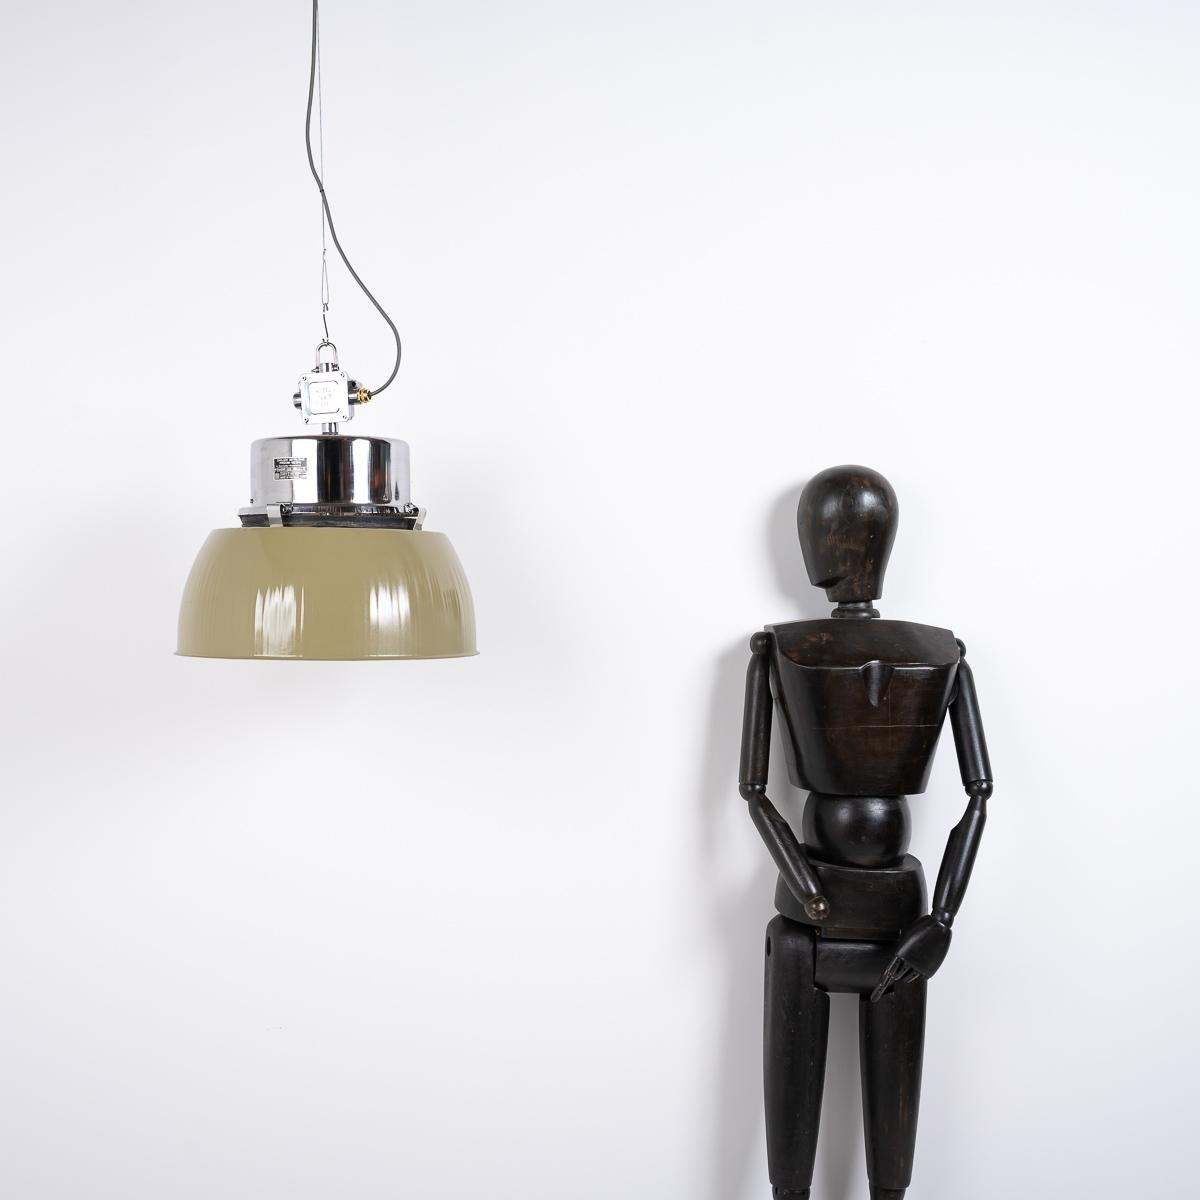 RECLAIMED EXTRA LARGE FACTORY LIGHTS FROM EASTERN EUROPE

These oversized industrial pendant lights once illuminated factories across eastern Europe.

Made in Poland circa 1985 by ZAKLADY METALOWE PREDOM - MESKO.

Original product plate is intact